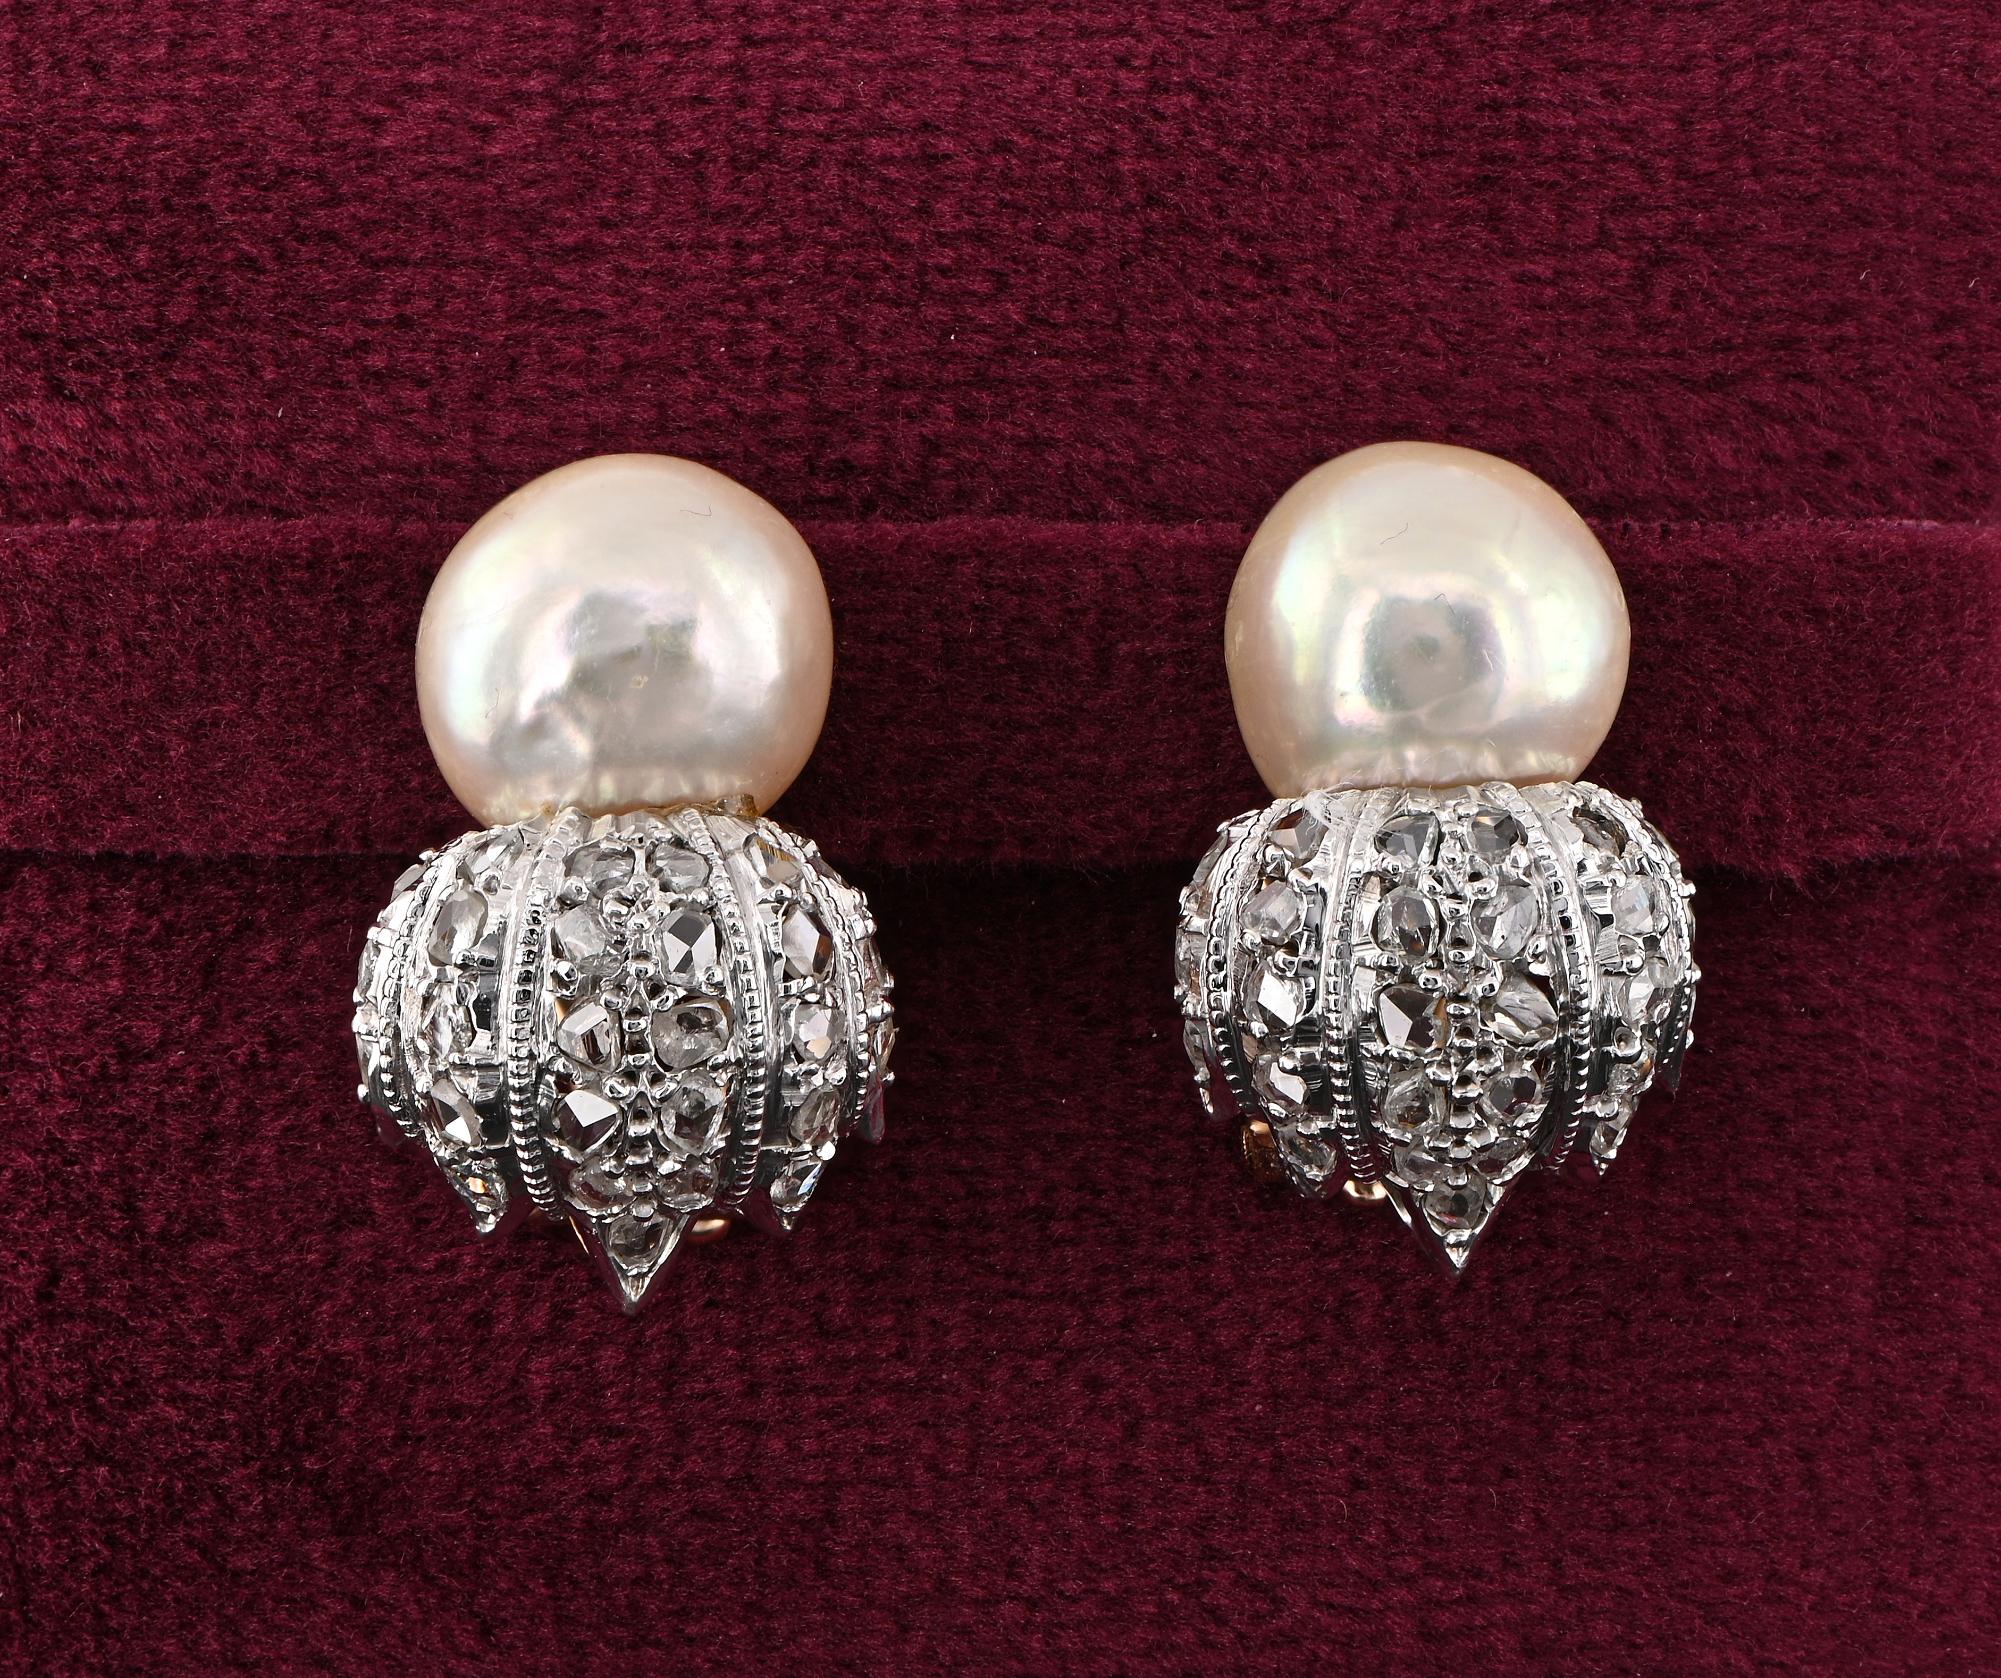 Buccellati
This very charming pair of earrings are from the Buccellati maison vintage pair, approx 1960 ca.
Hand crafted of solid 18 KT gold and silver portions- Signed Buccellati
Classy style by Buccellati launched by Mario and repeated in